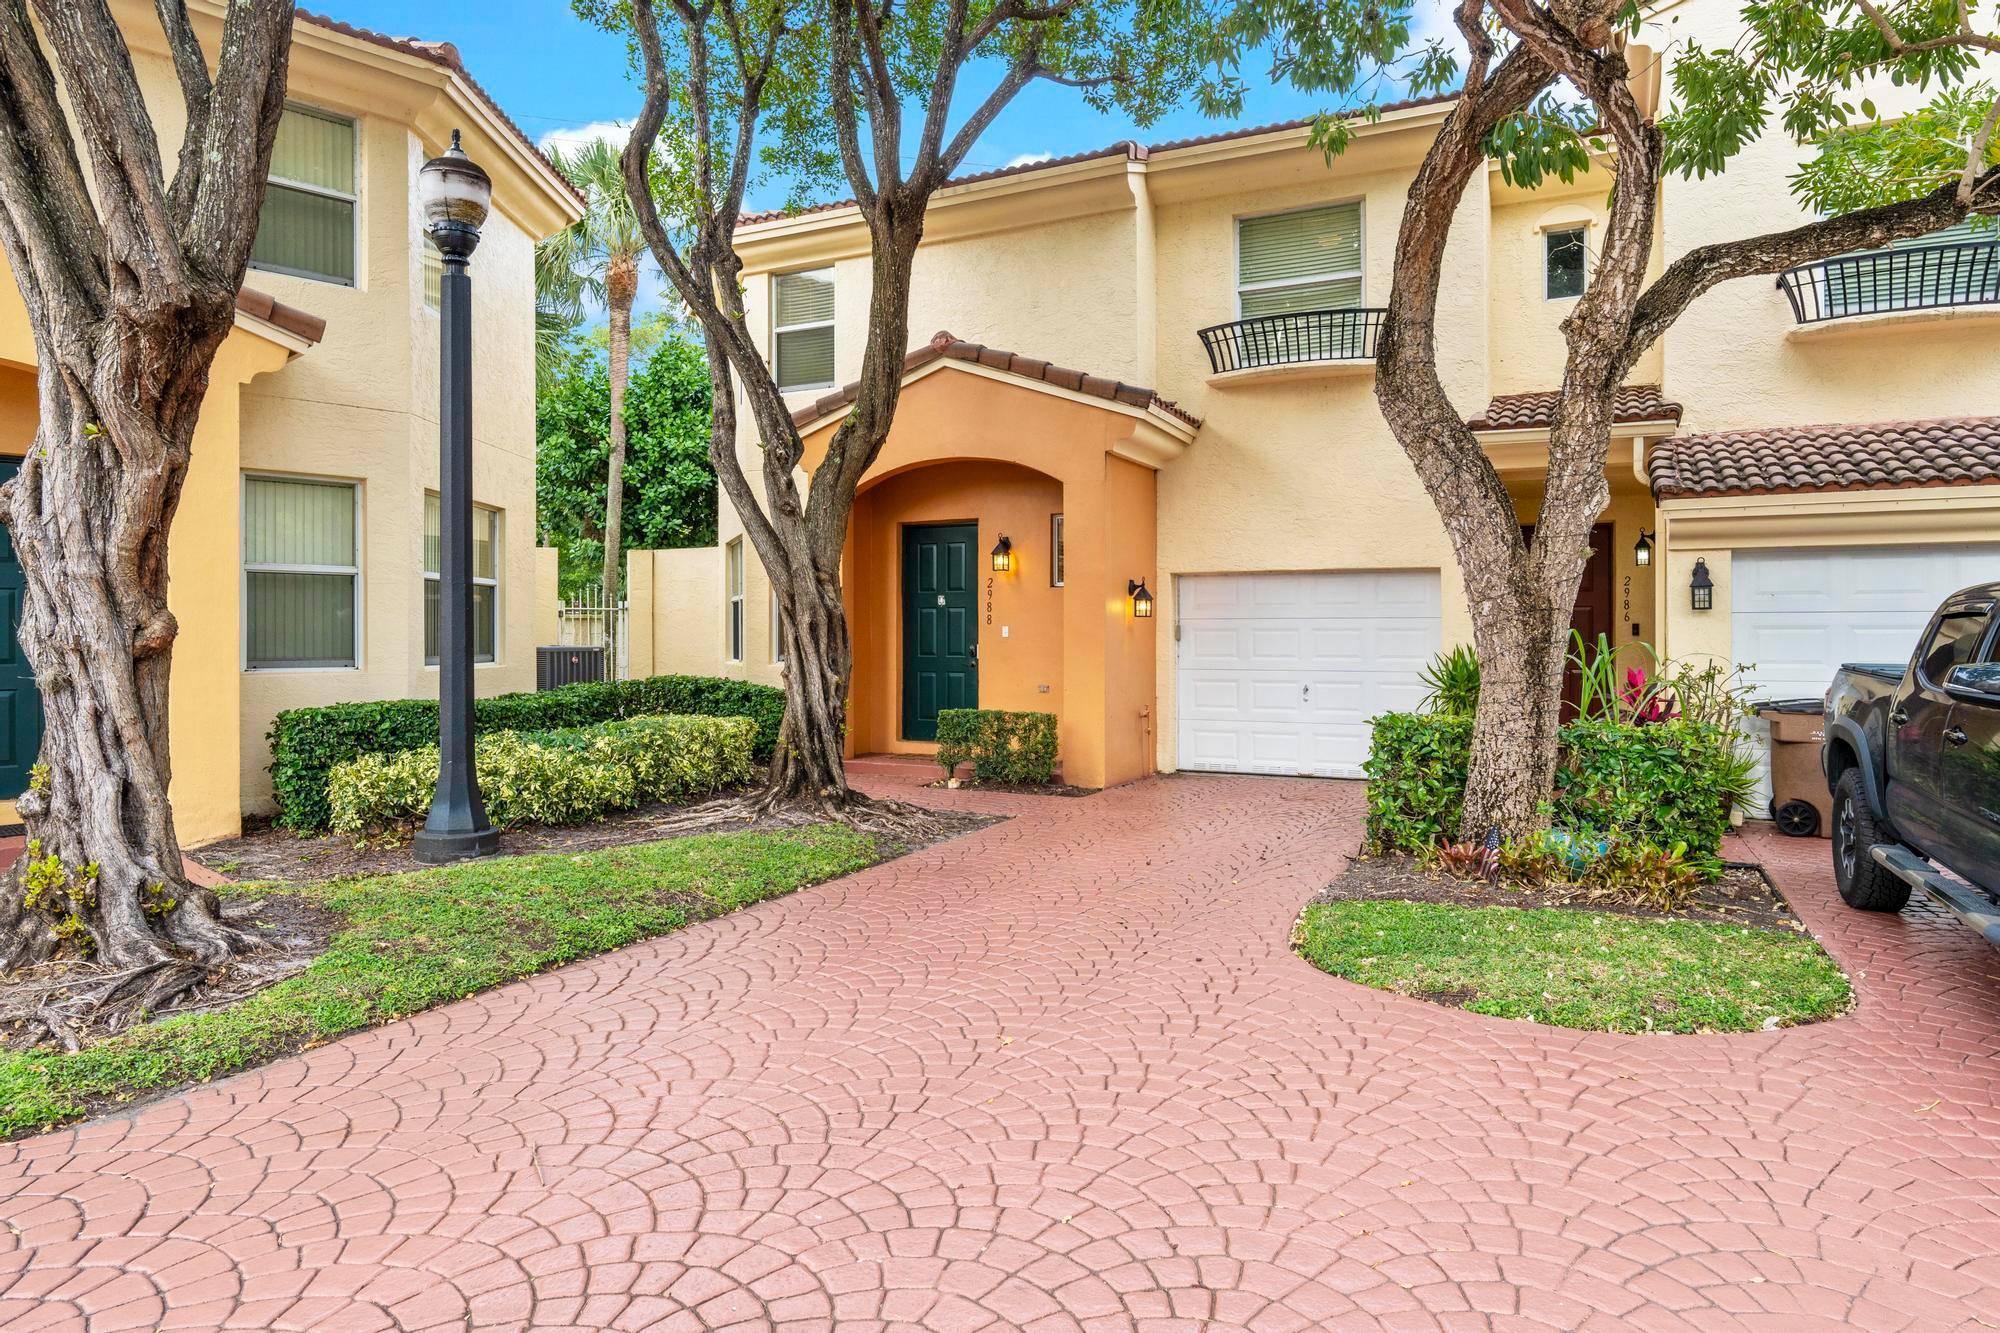 Peace and tranquility meets leisure in this highly sought after community of Deer Creek in Deerfield Beach.